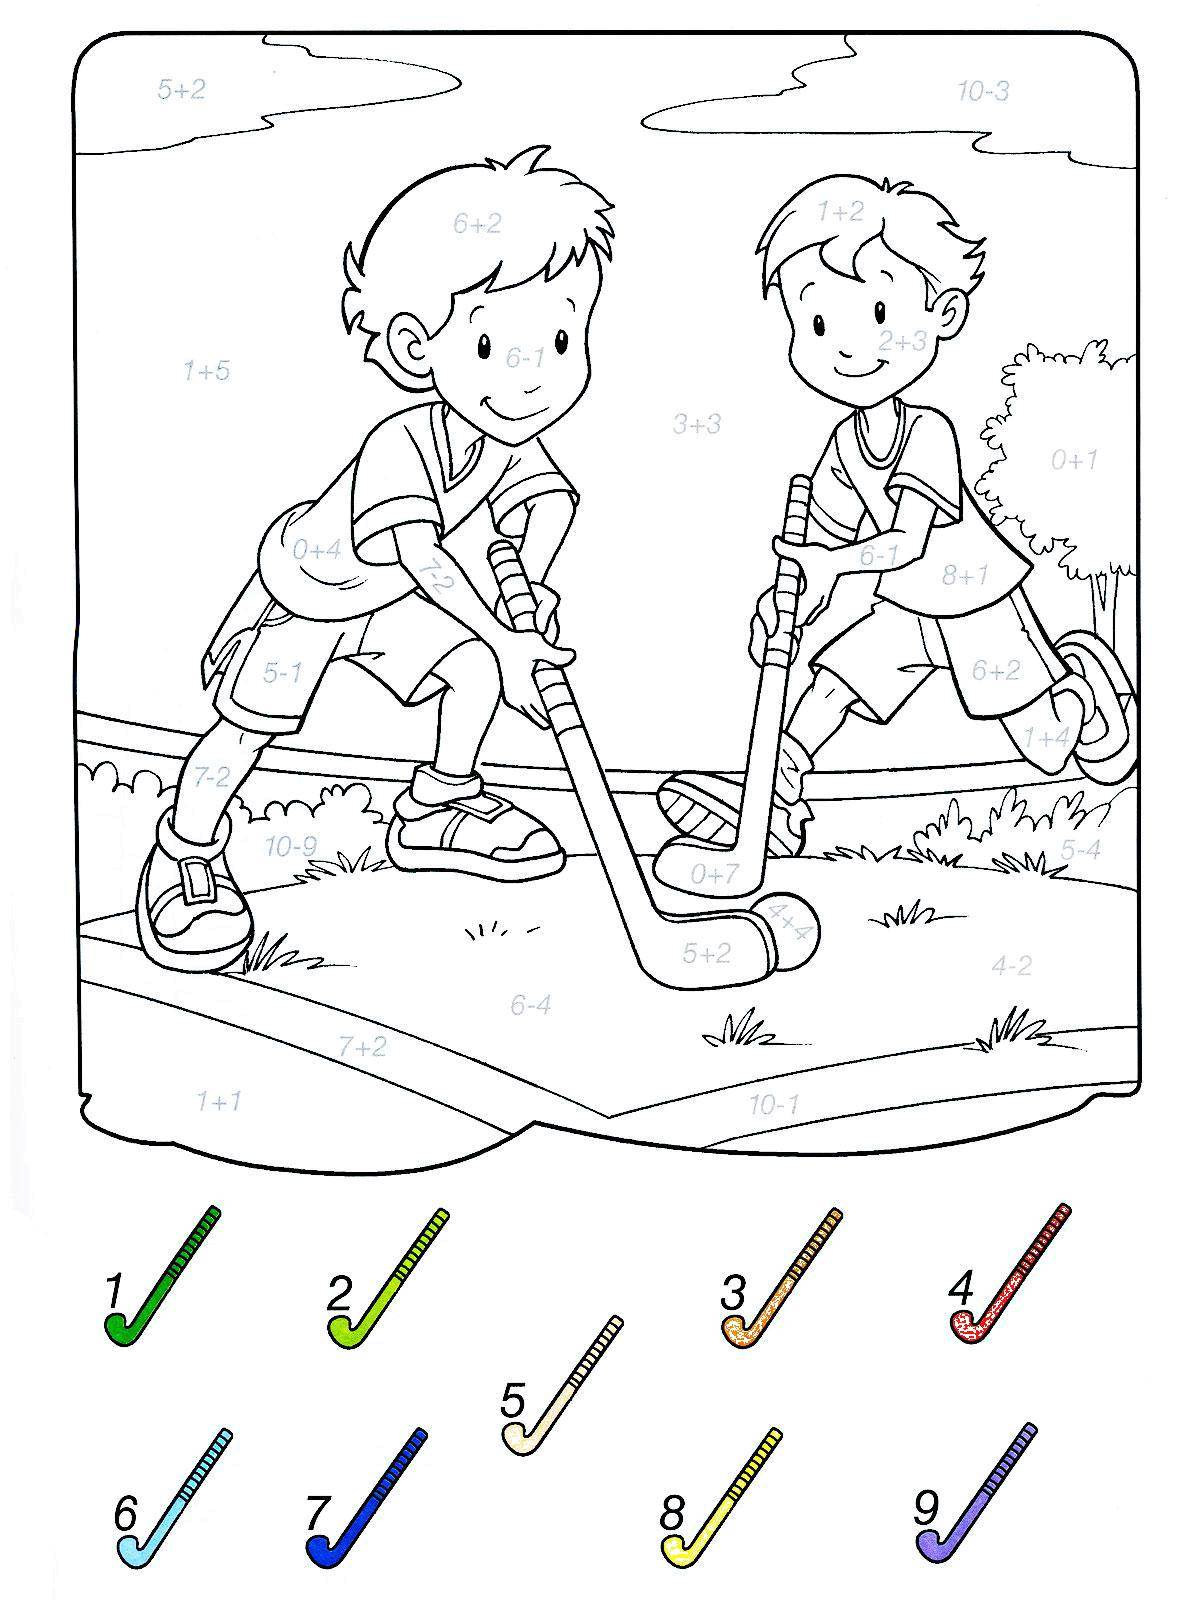 Coloring Solve examples and paint a picture by numbers. Category mathematical coloring pages. Tags:  sports, kids, math, examples.